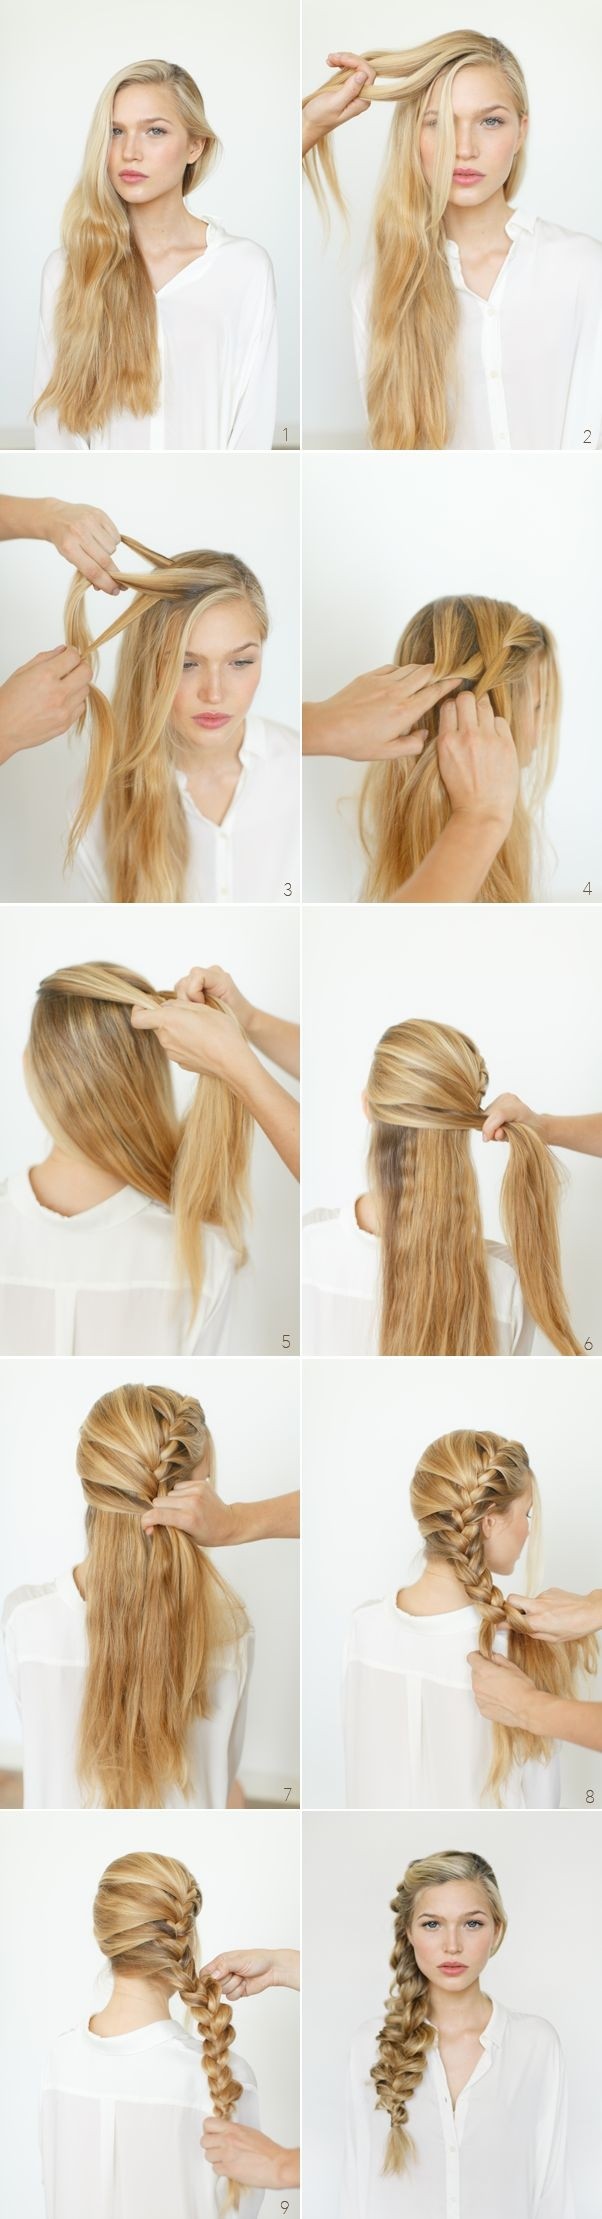 Side Braided Hairstyle for Long Hair